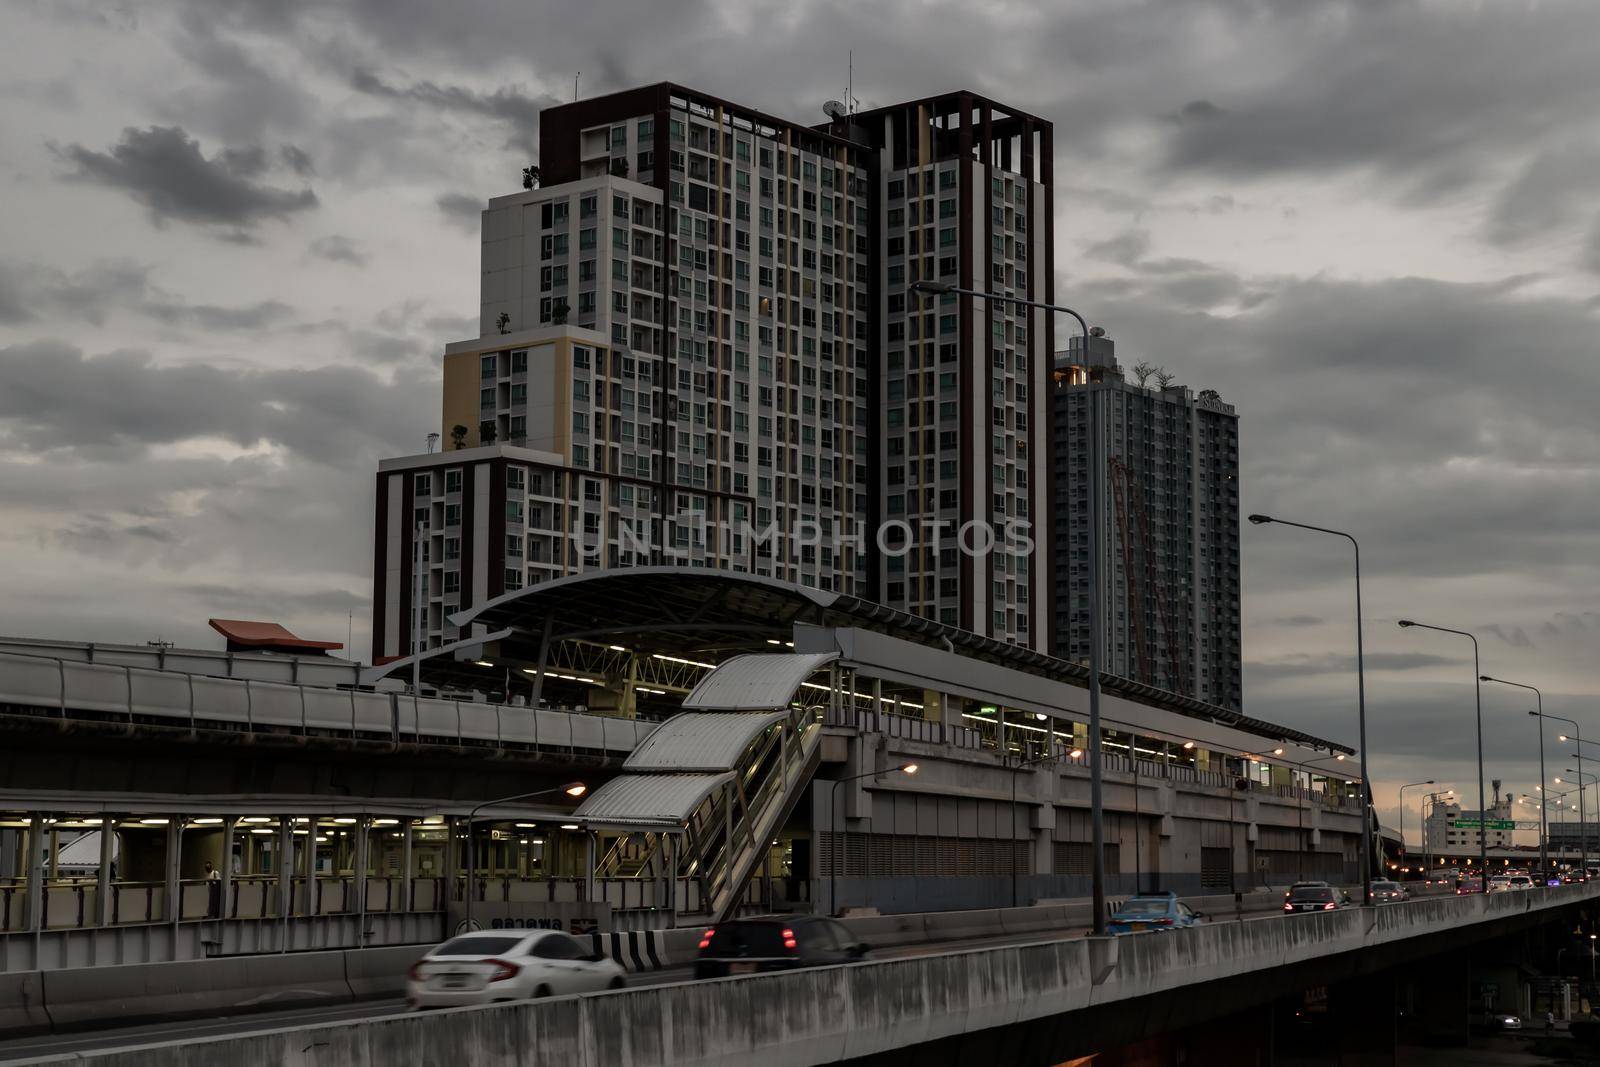 BTS Skytrain on Talat Phlu station, BTS Skytrain is a mass transit system in Bangkok to help facilitate and speed the journey. by tosirikul